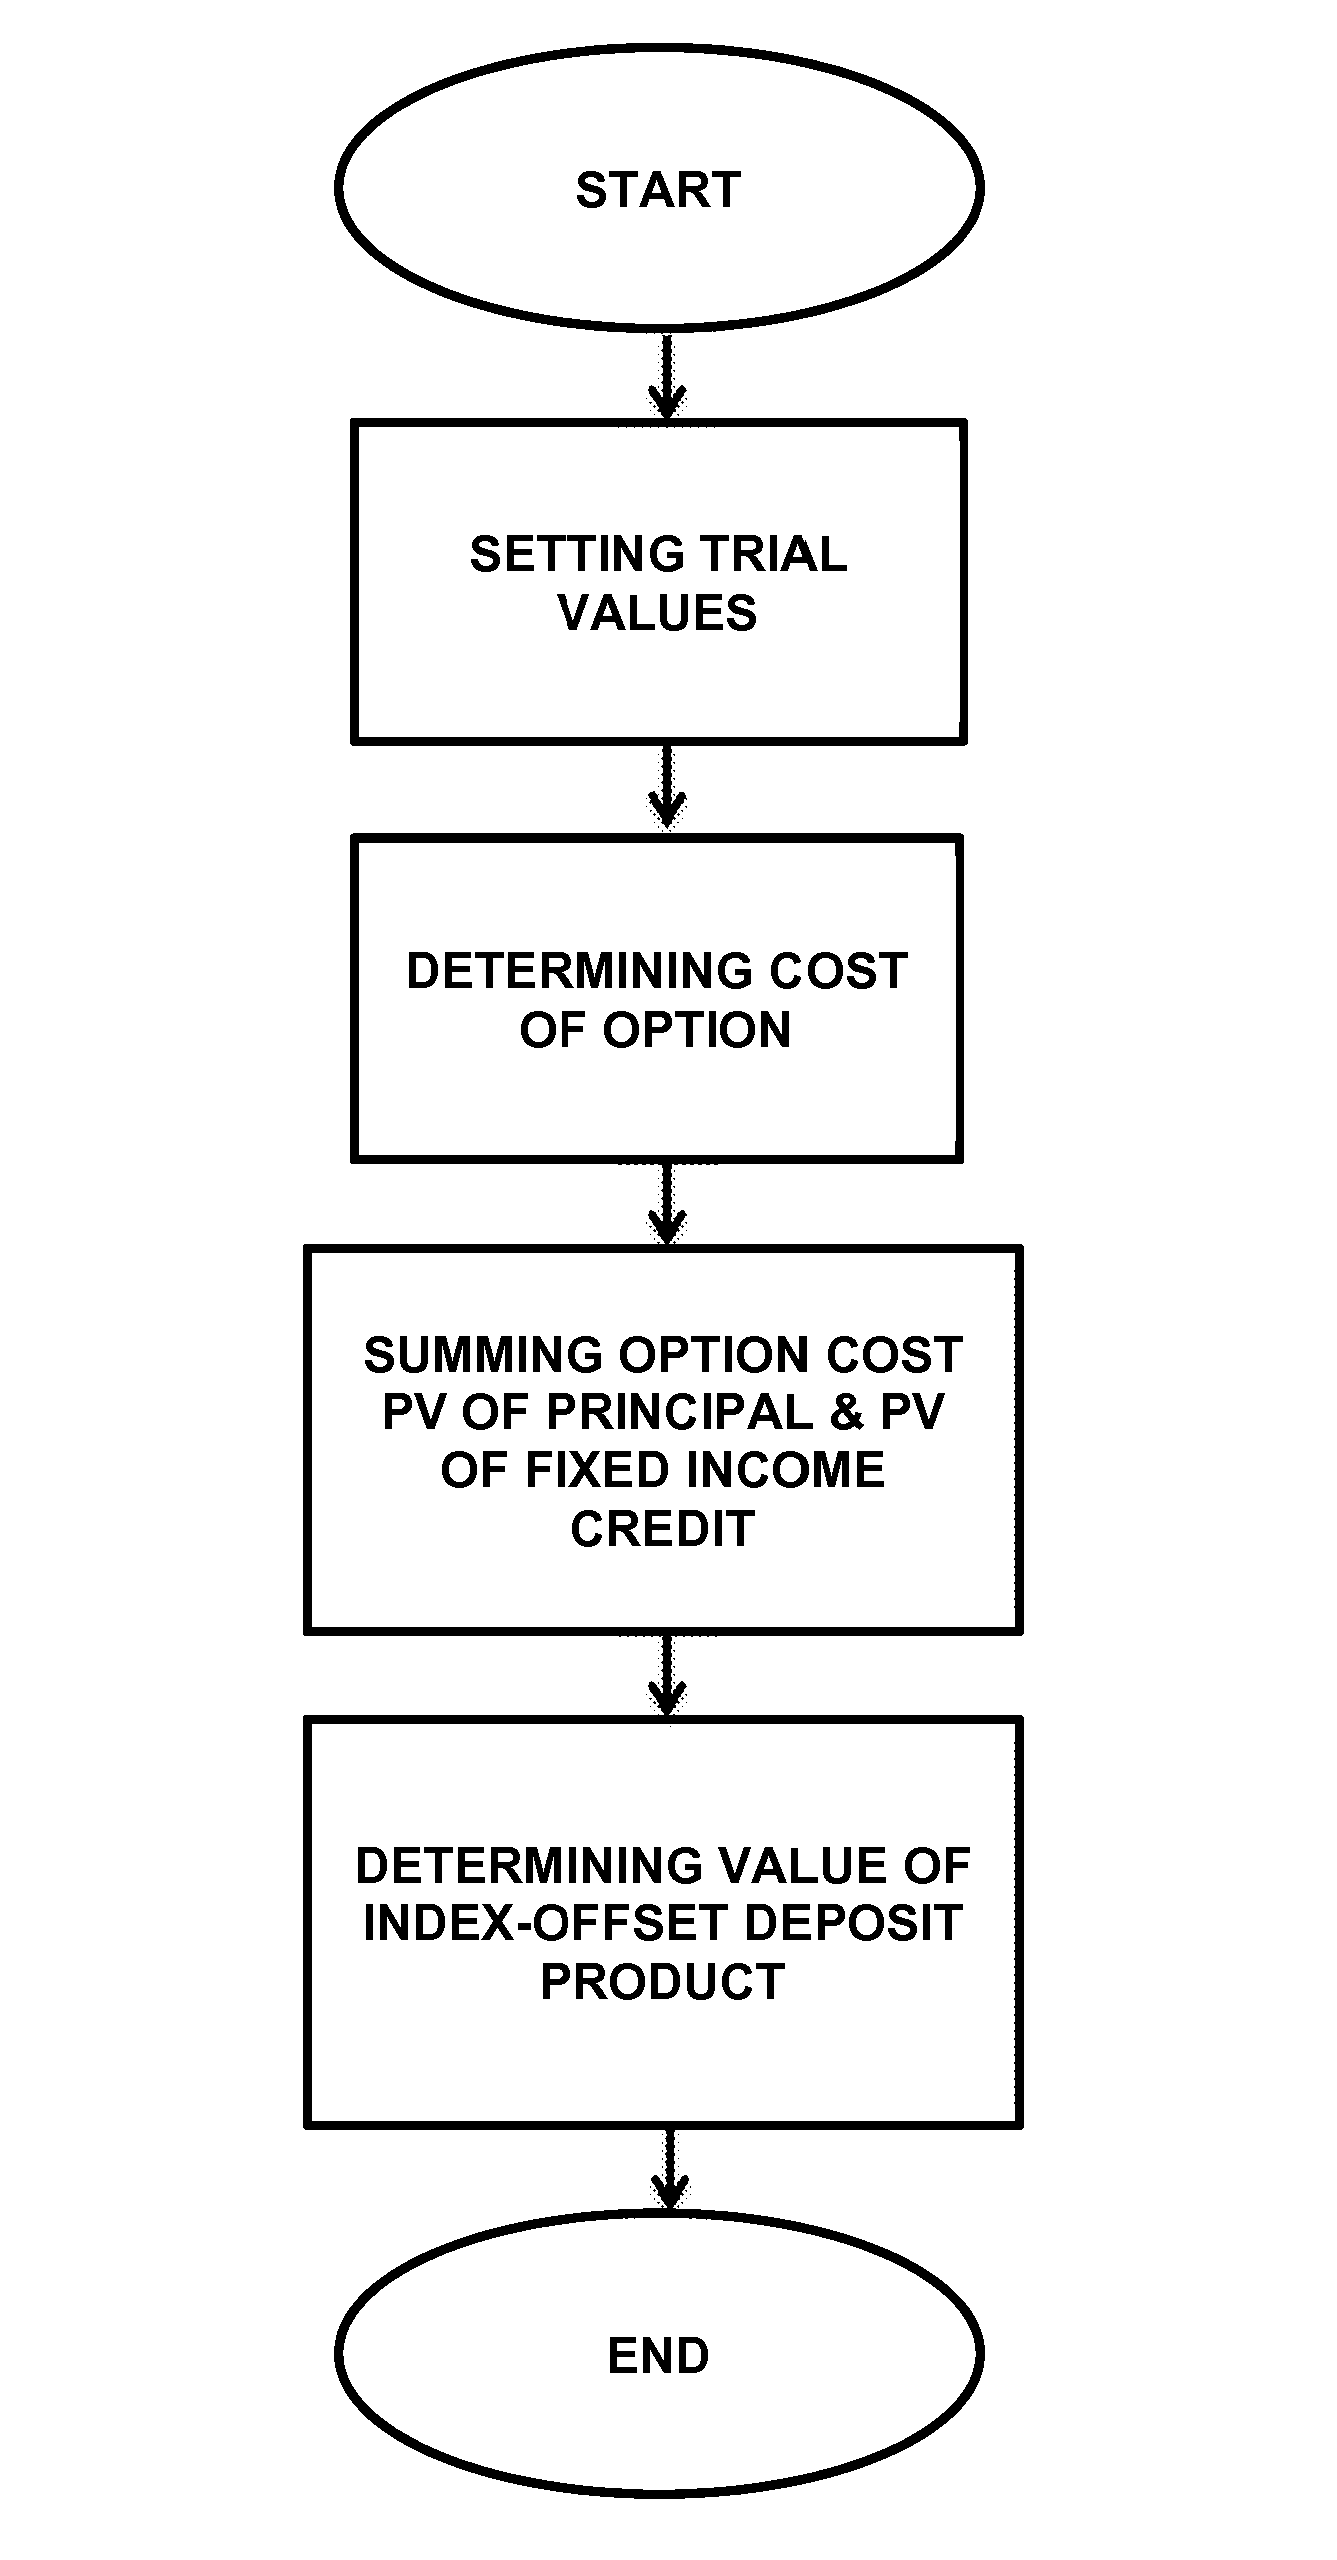 Computer based system for pricing an index-offset deposit product